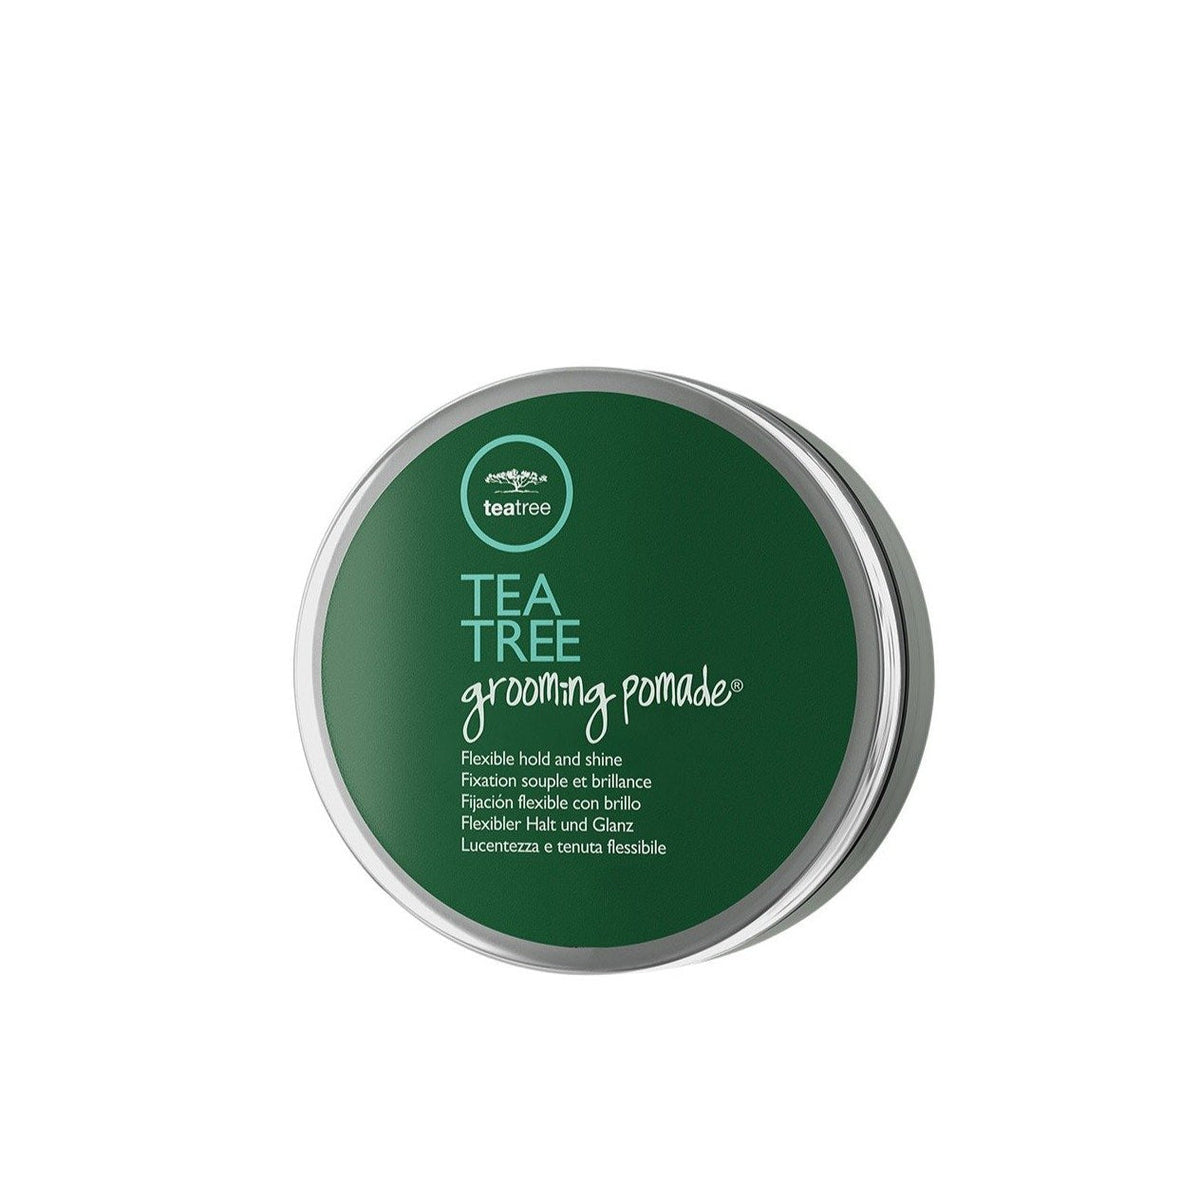 Tea Tree Grooming Pomade - by Paul Mitchell |ProCare Outlet|